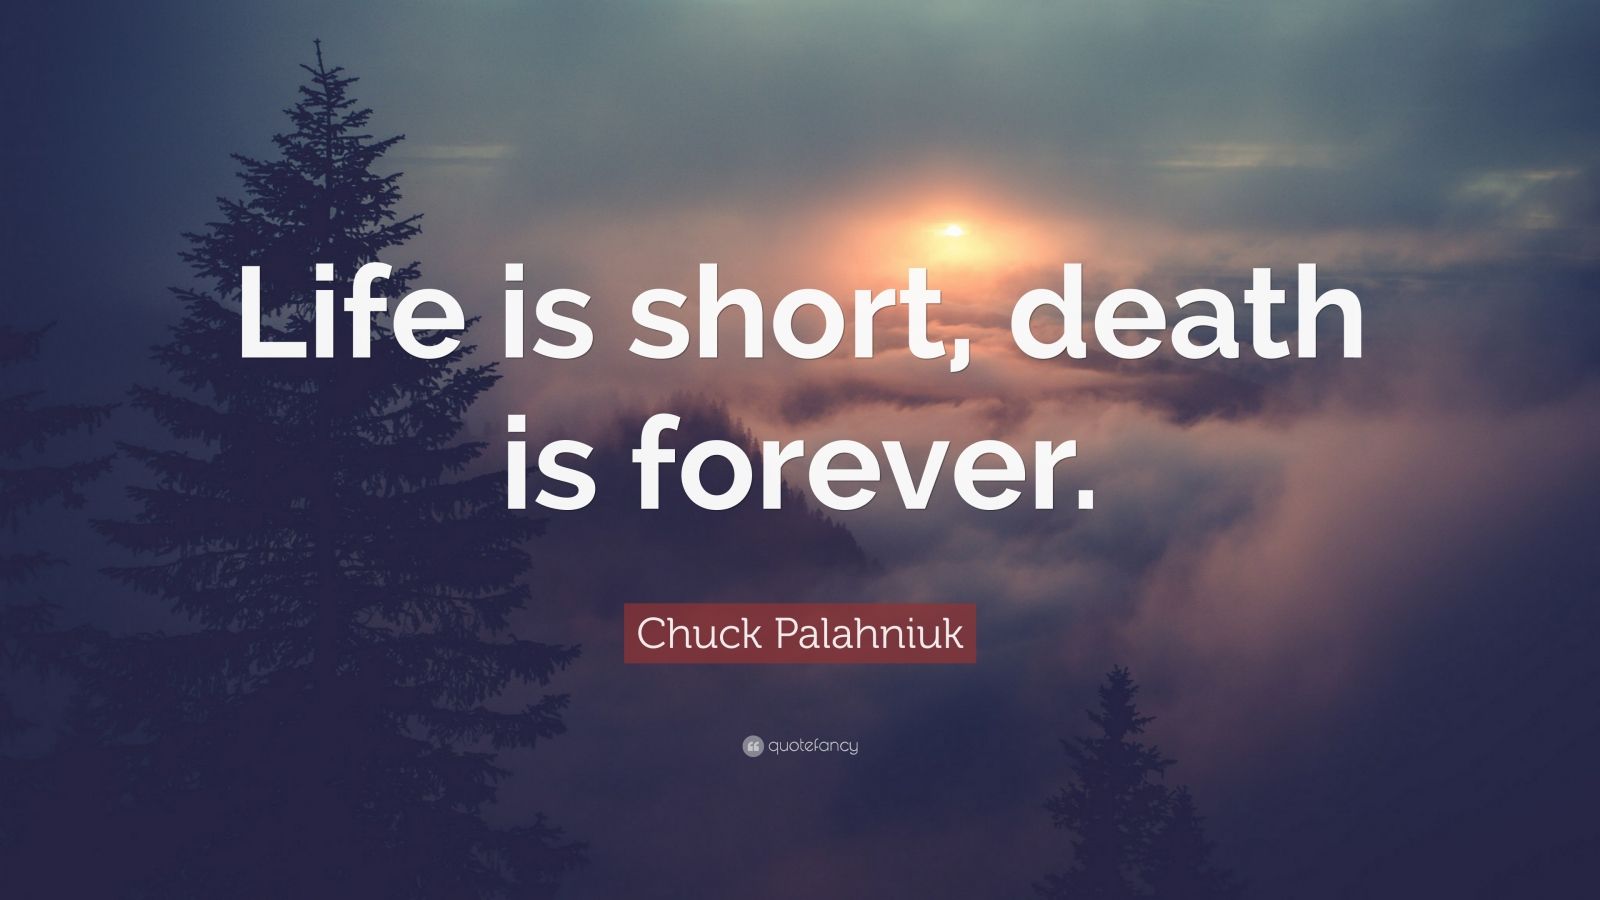 Chuck Palahniuk Quote: “Life is short, death is forever.” (12